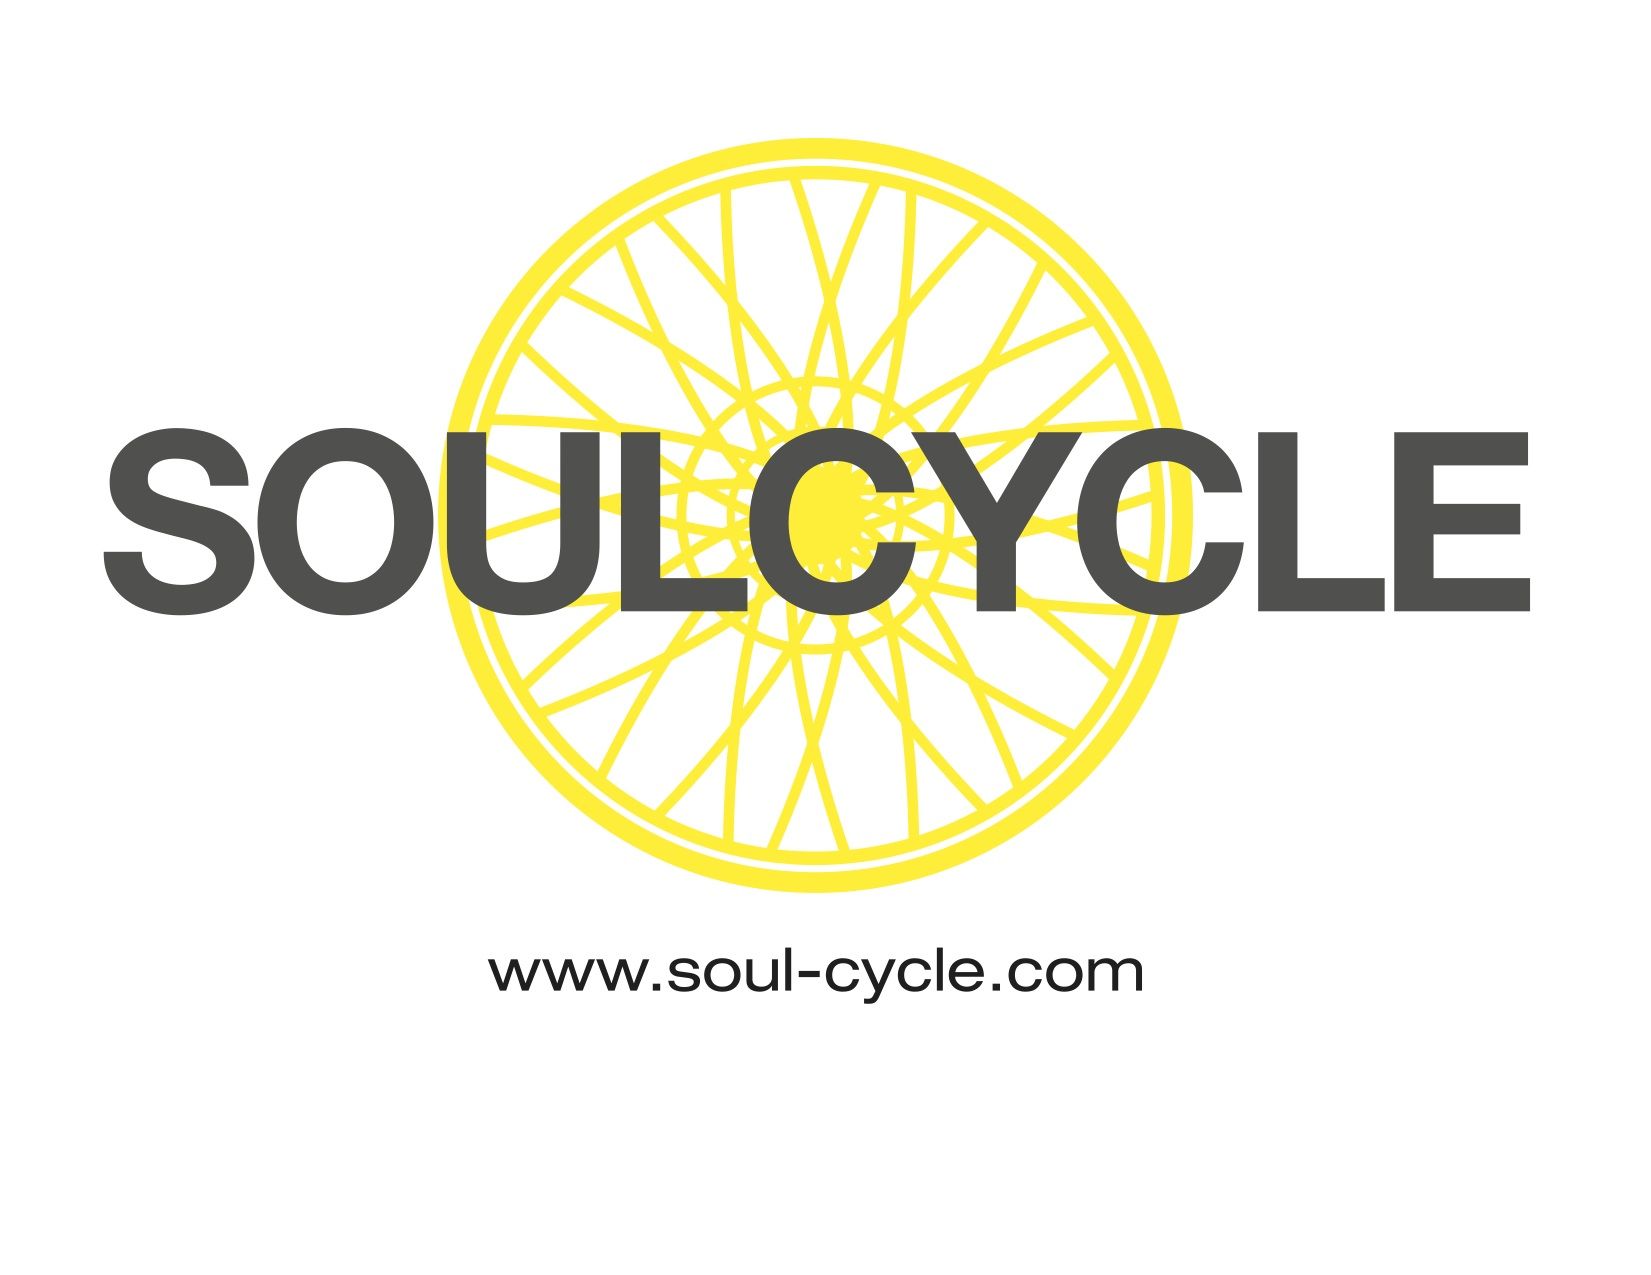 Gifts for Soulcycle lovers.